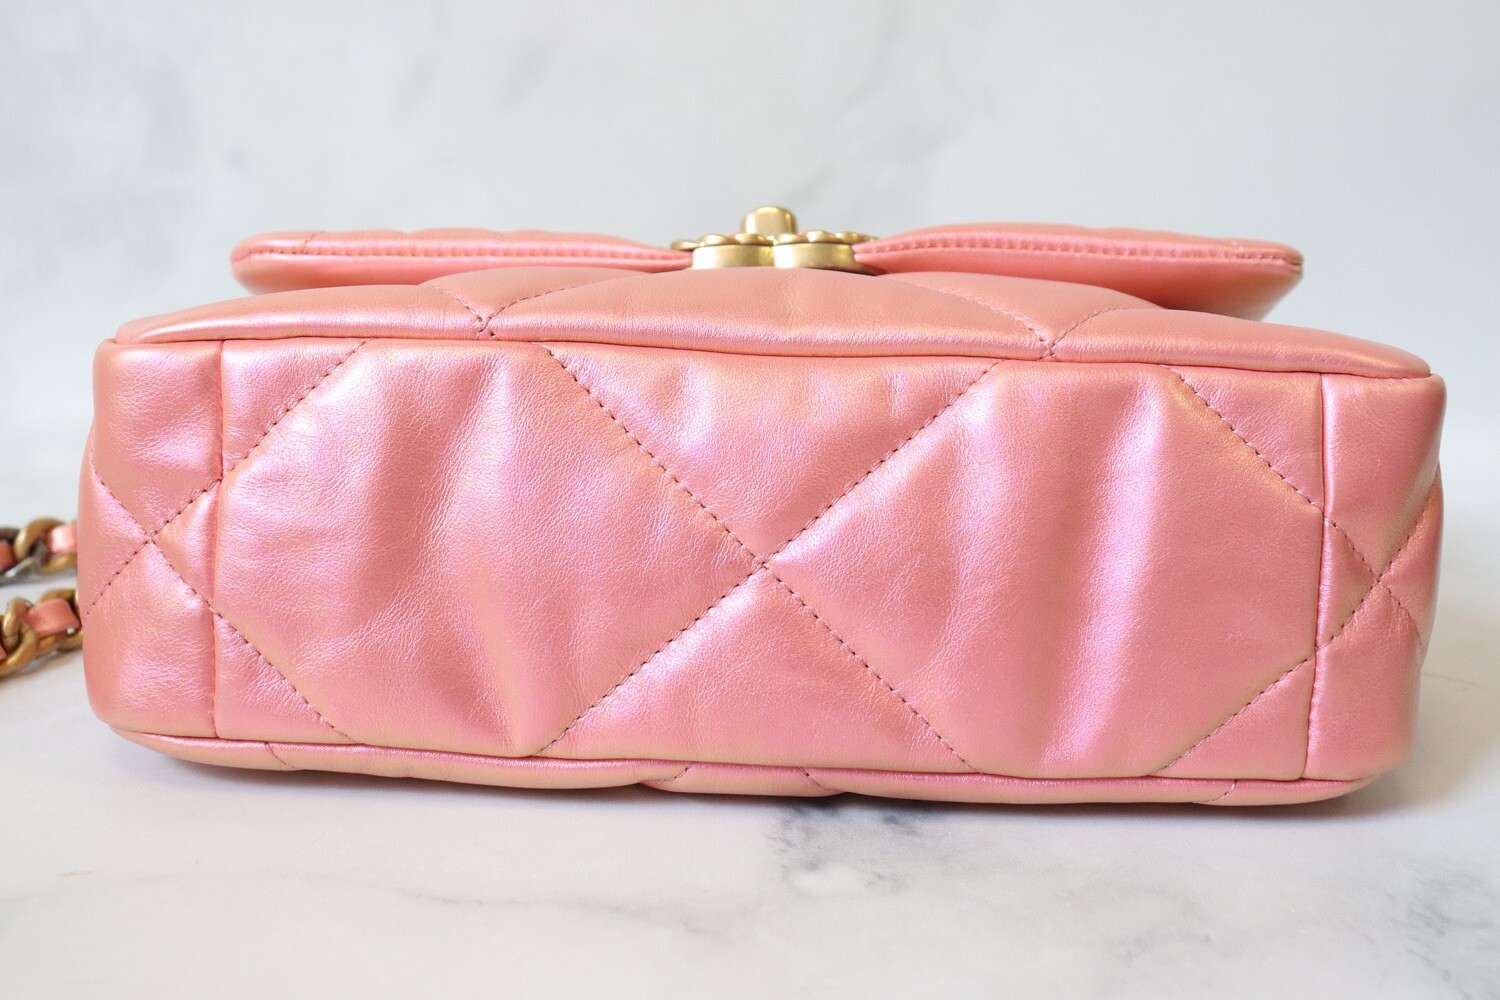 Chanel 19 Iridescent Pink Leather, Like New in Box